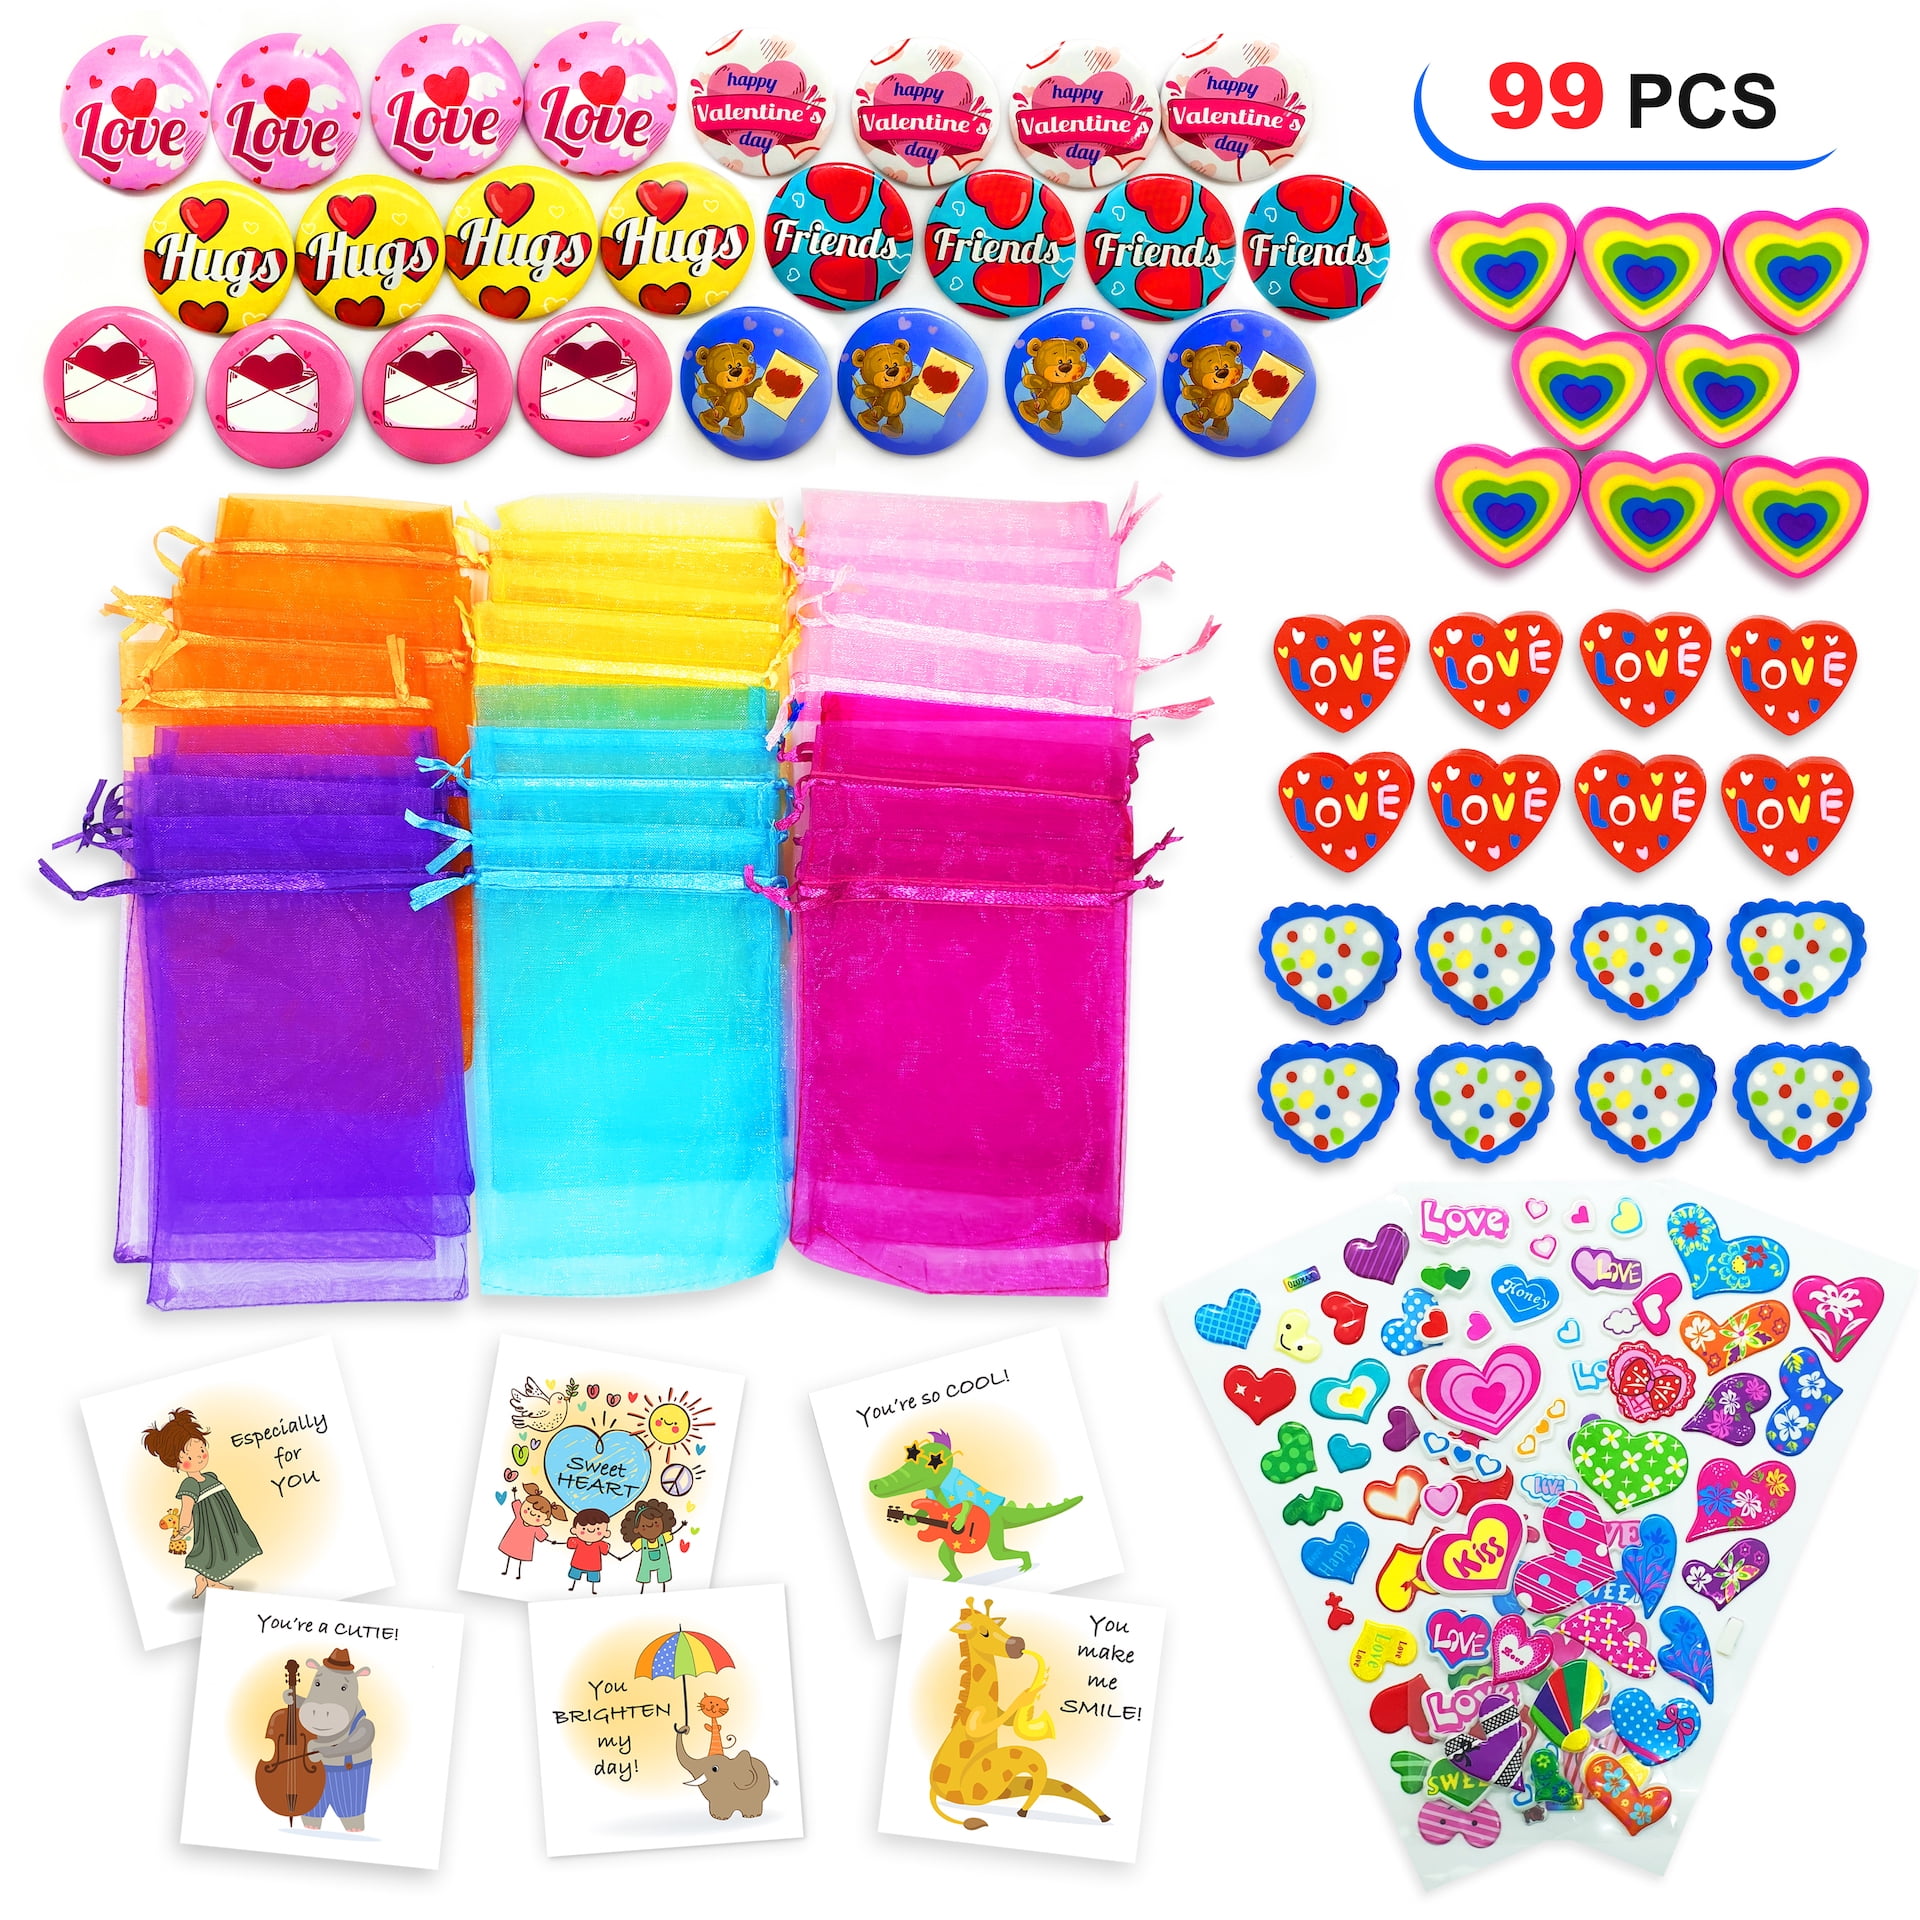  40 Pack Valentines Day Gifts for Kids Classroom Exchange  Valentine Day Heart Balloons Party Favors for Kids Decorations School Class  Prizes I Love You Heart Balloons Gift 4.3 Inch… : Toys